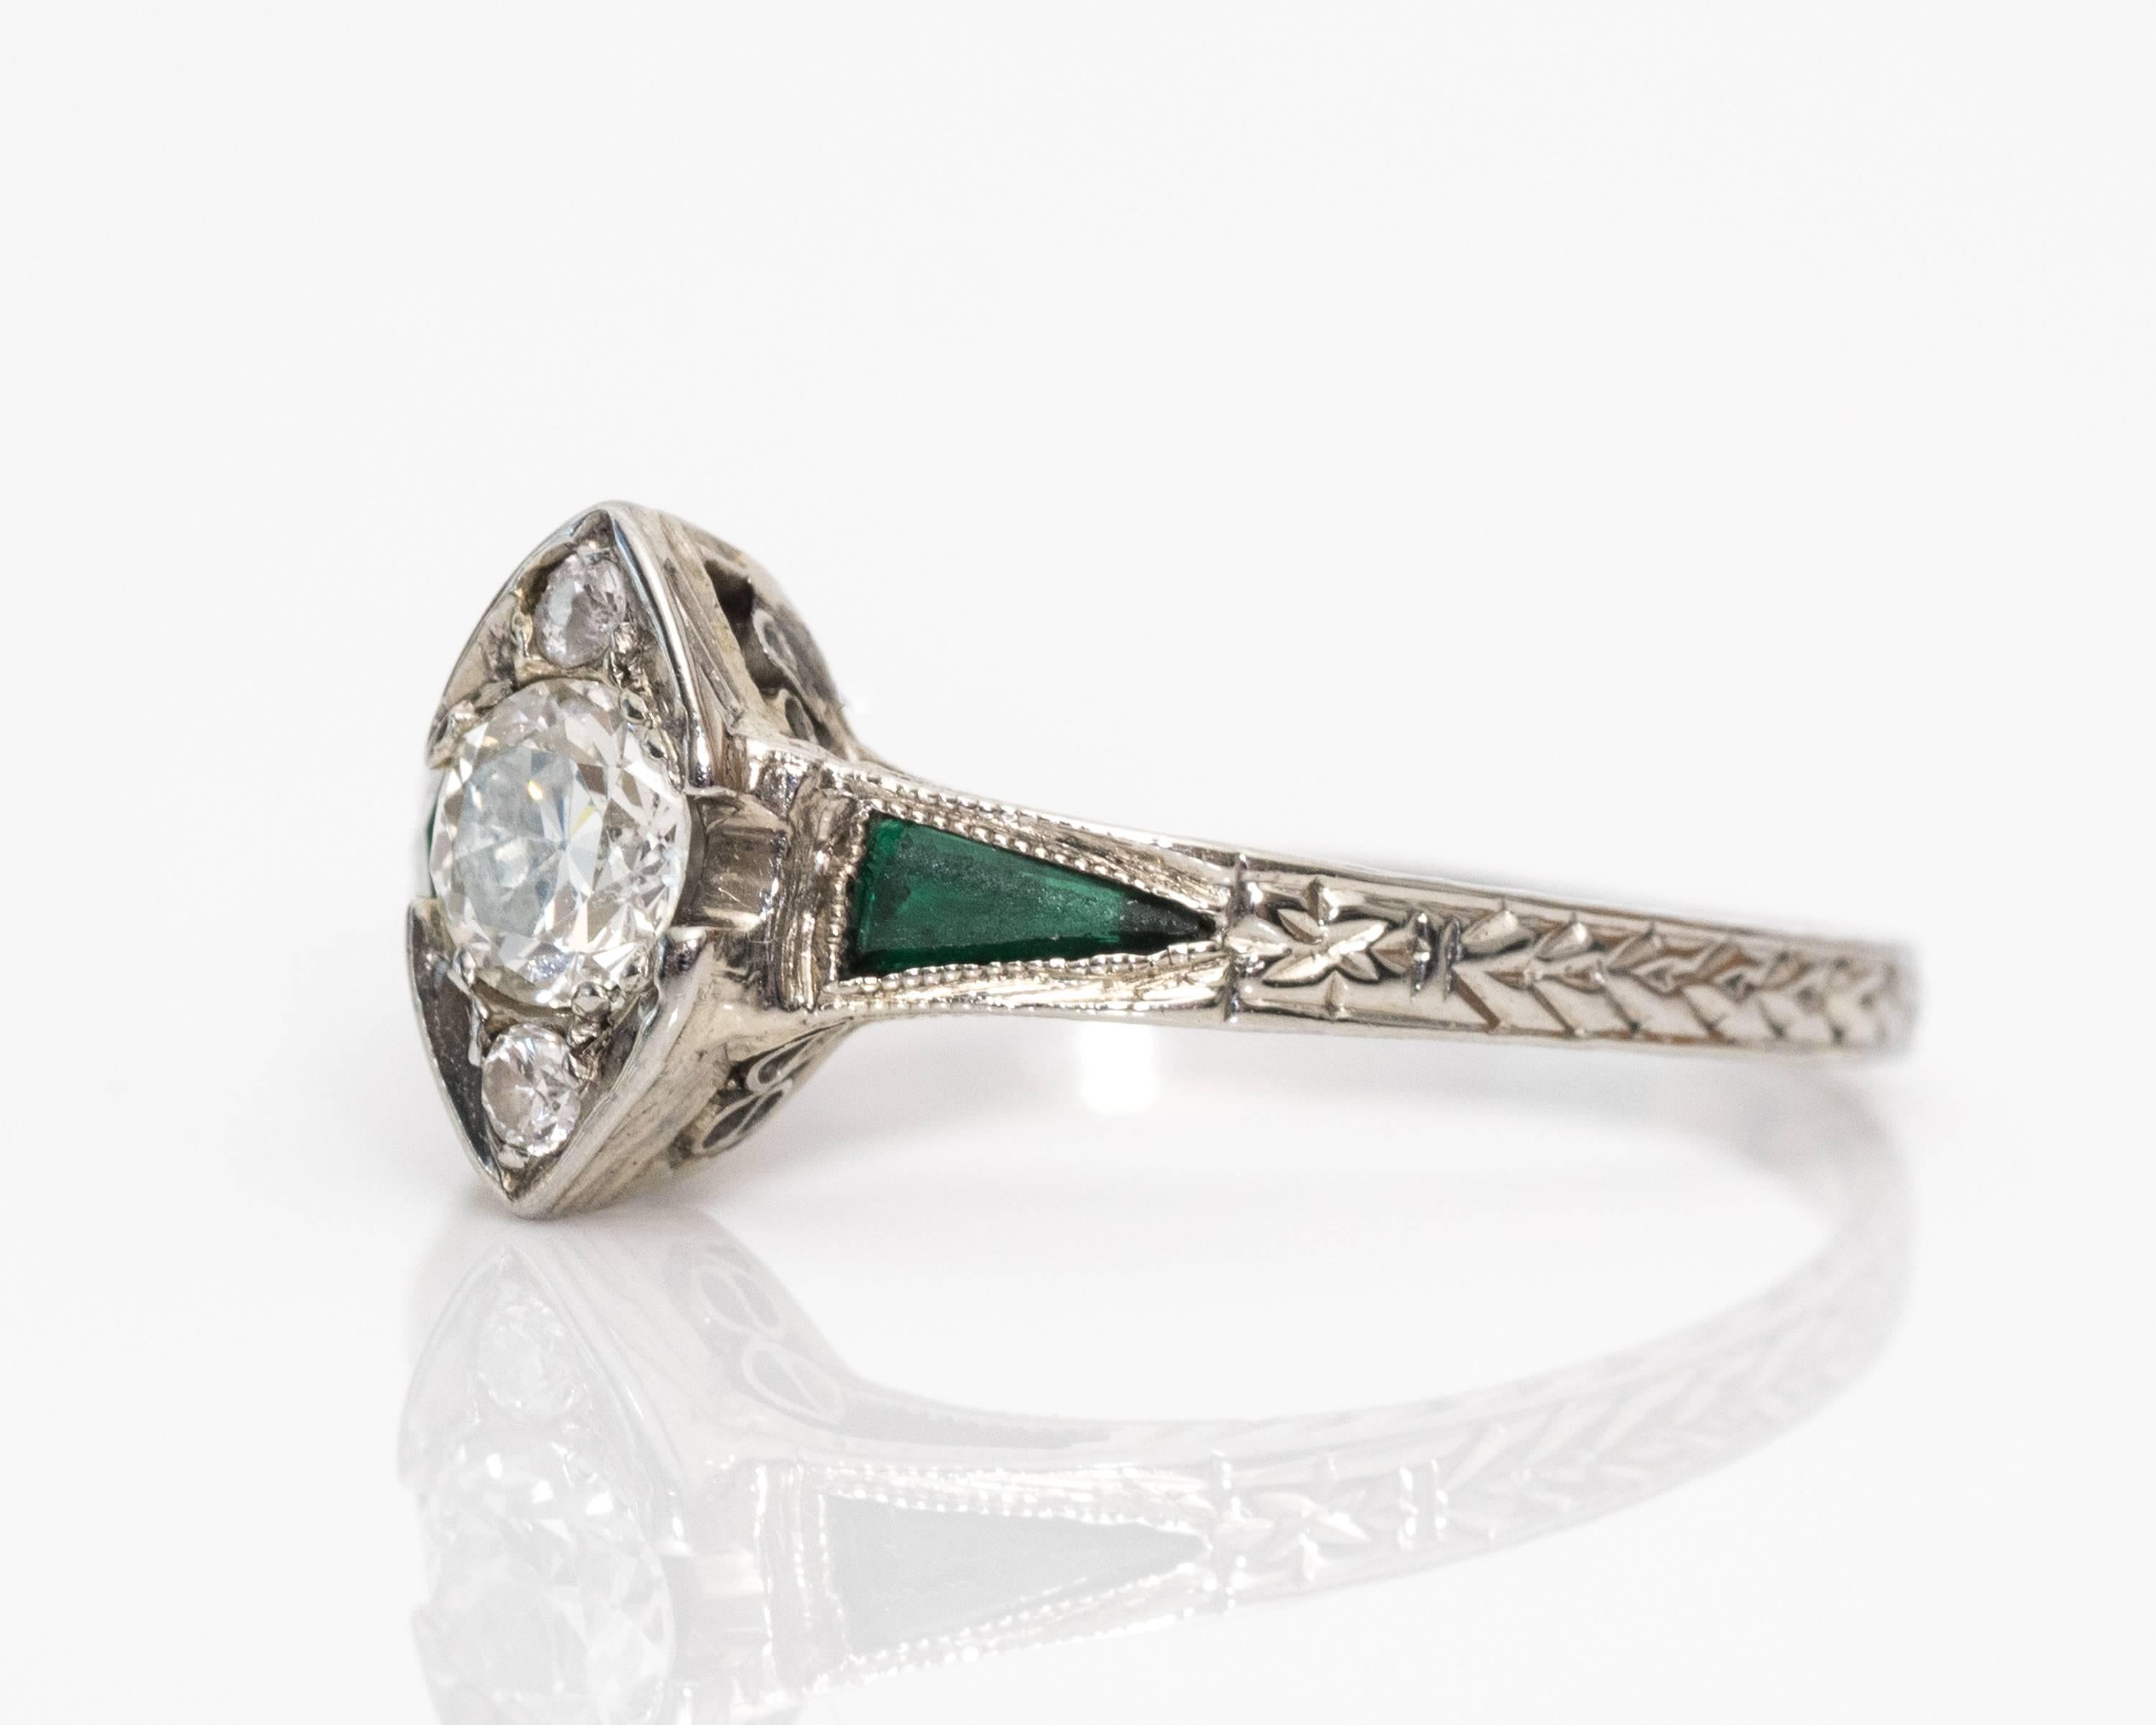 1915 Art Deco .20 Carat Old European Diamond Emerald 18 Karat White Gold Ring features an Old European Diamond (0.20 carat) center stone with Two Accent Diamonds on Top and Bottom. Marquise Shaped Bezel Places the Ring Together in a Single Setting,